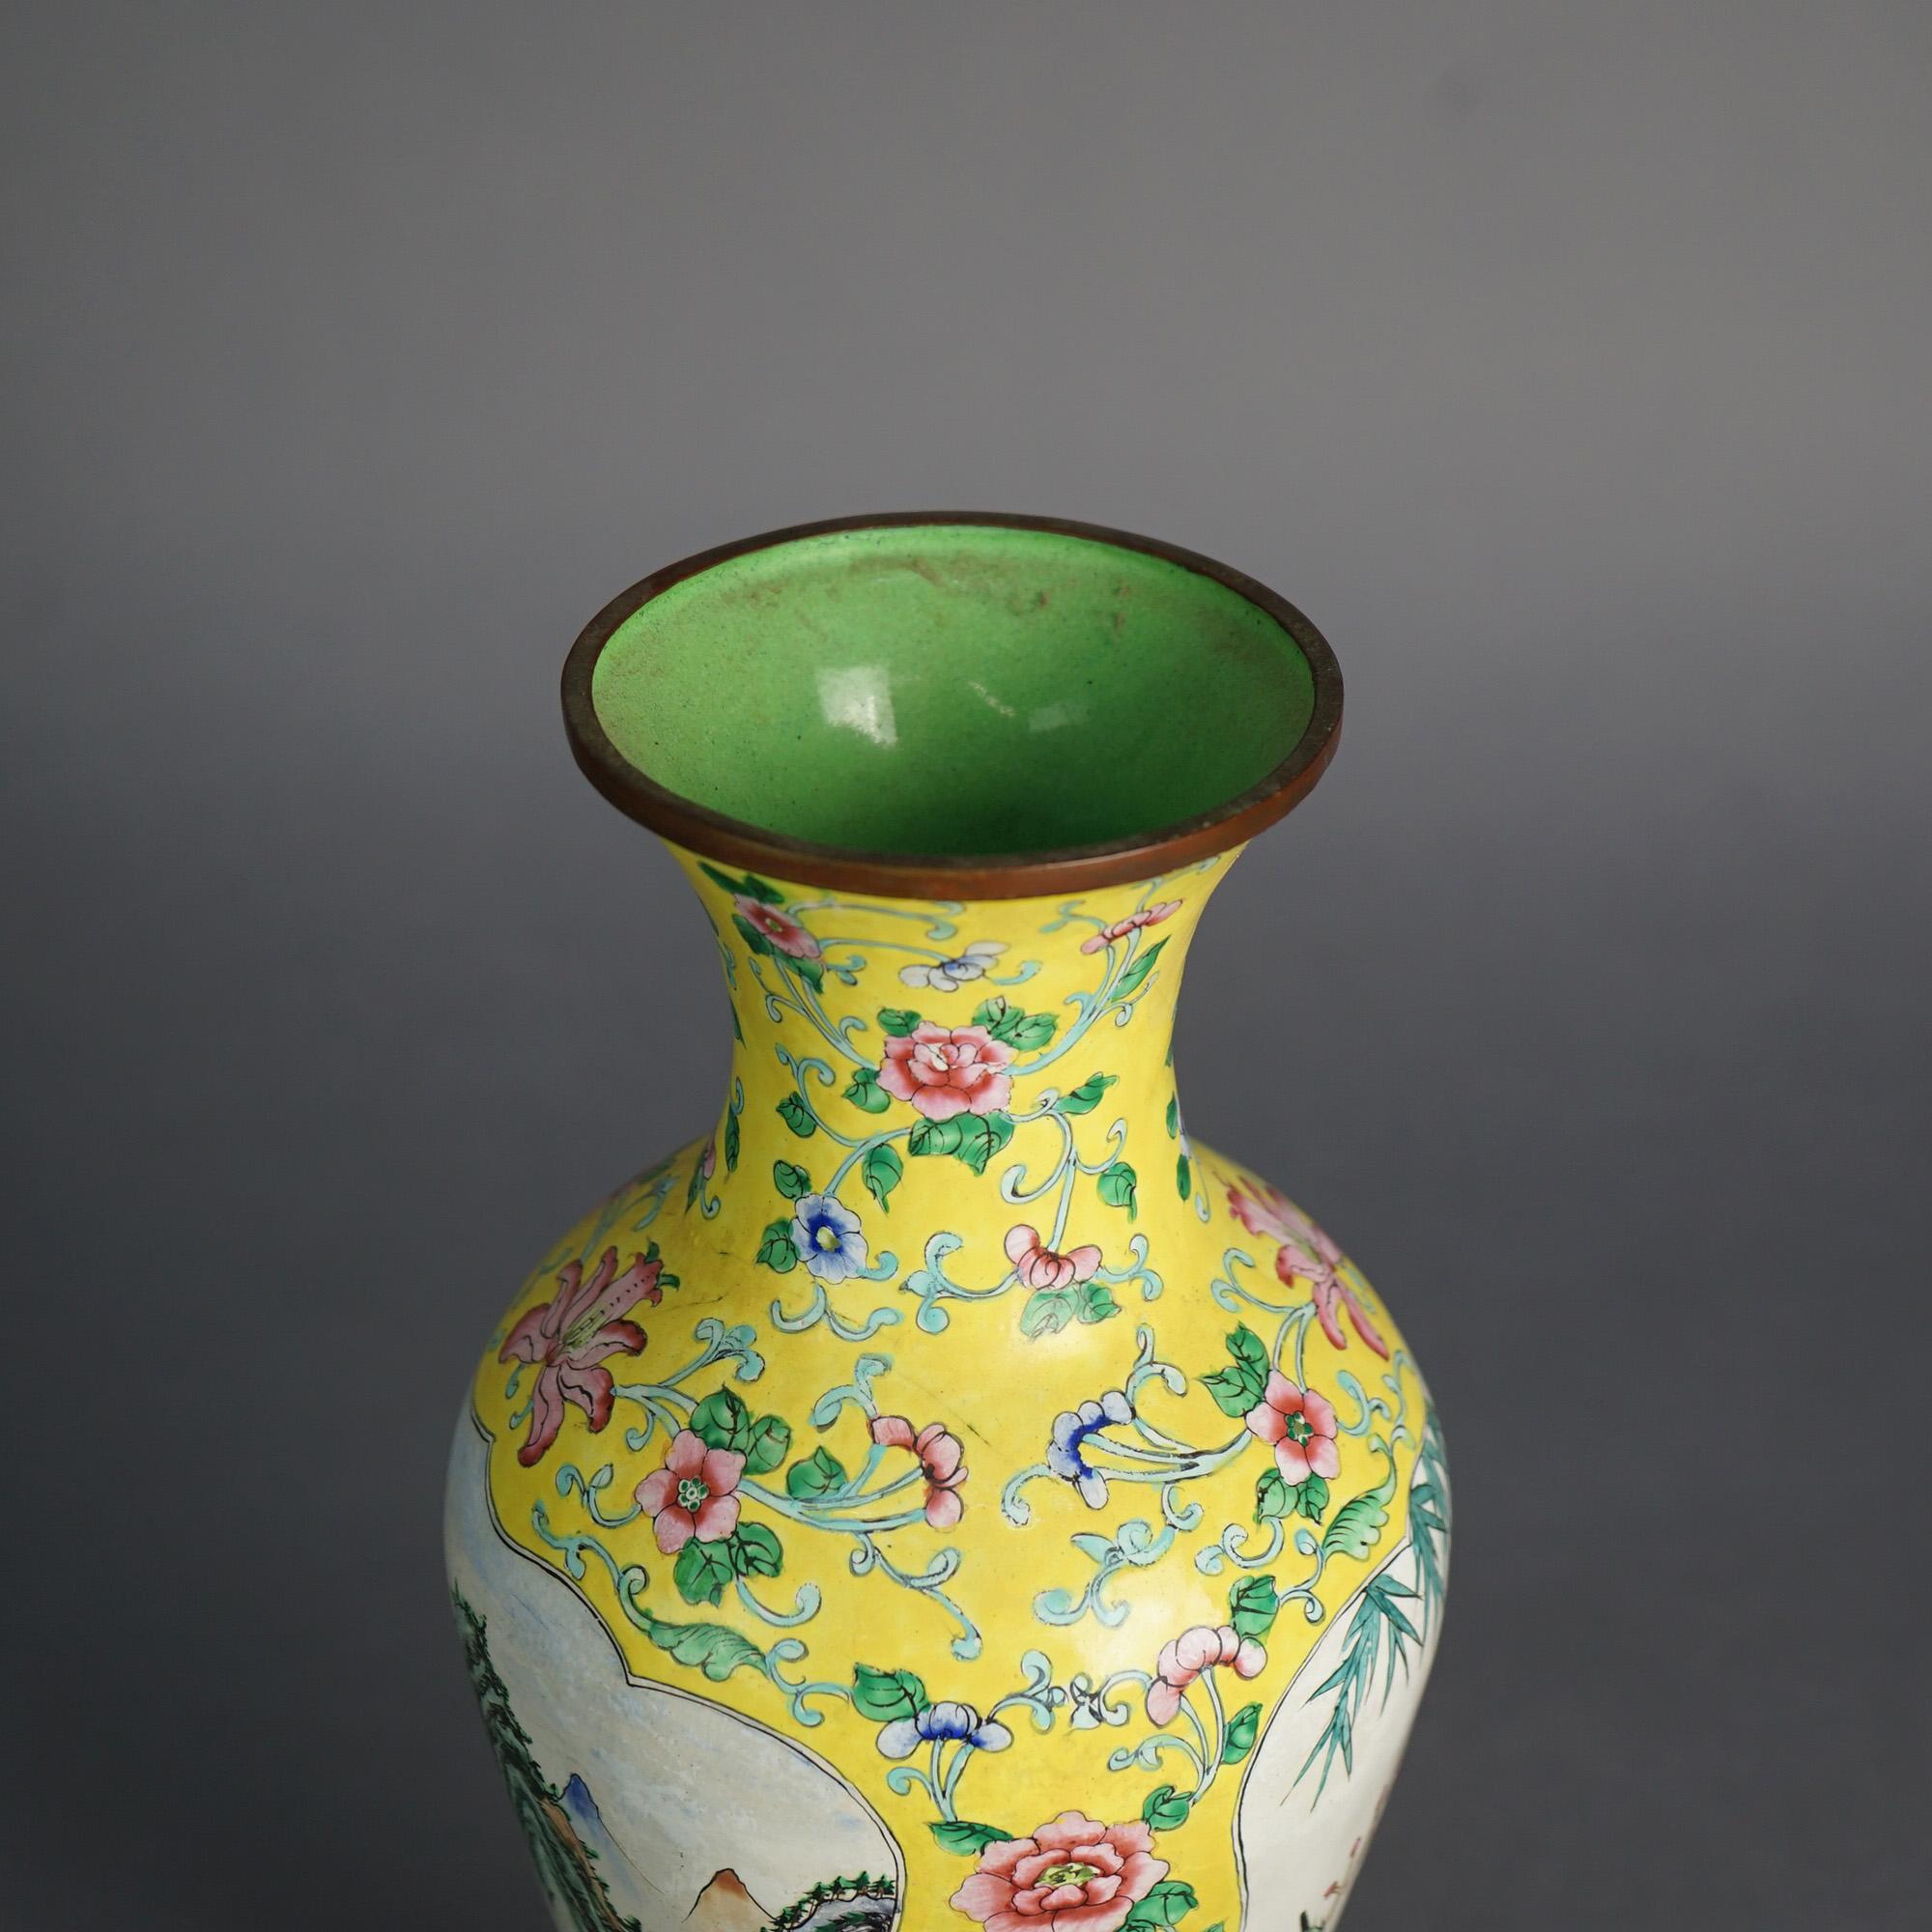 Metal Antique Chinese Enameled Vase with Landscape & Flowers C1930 For Sale